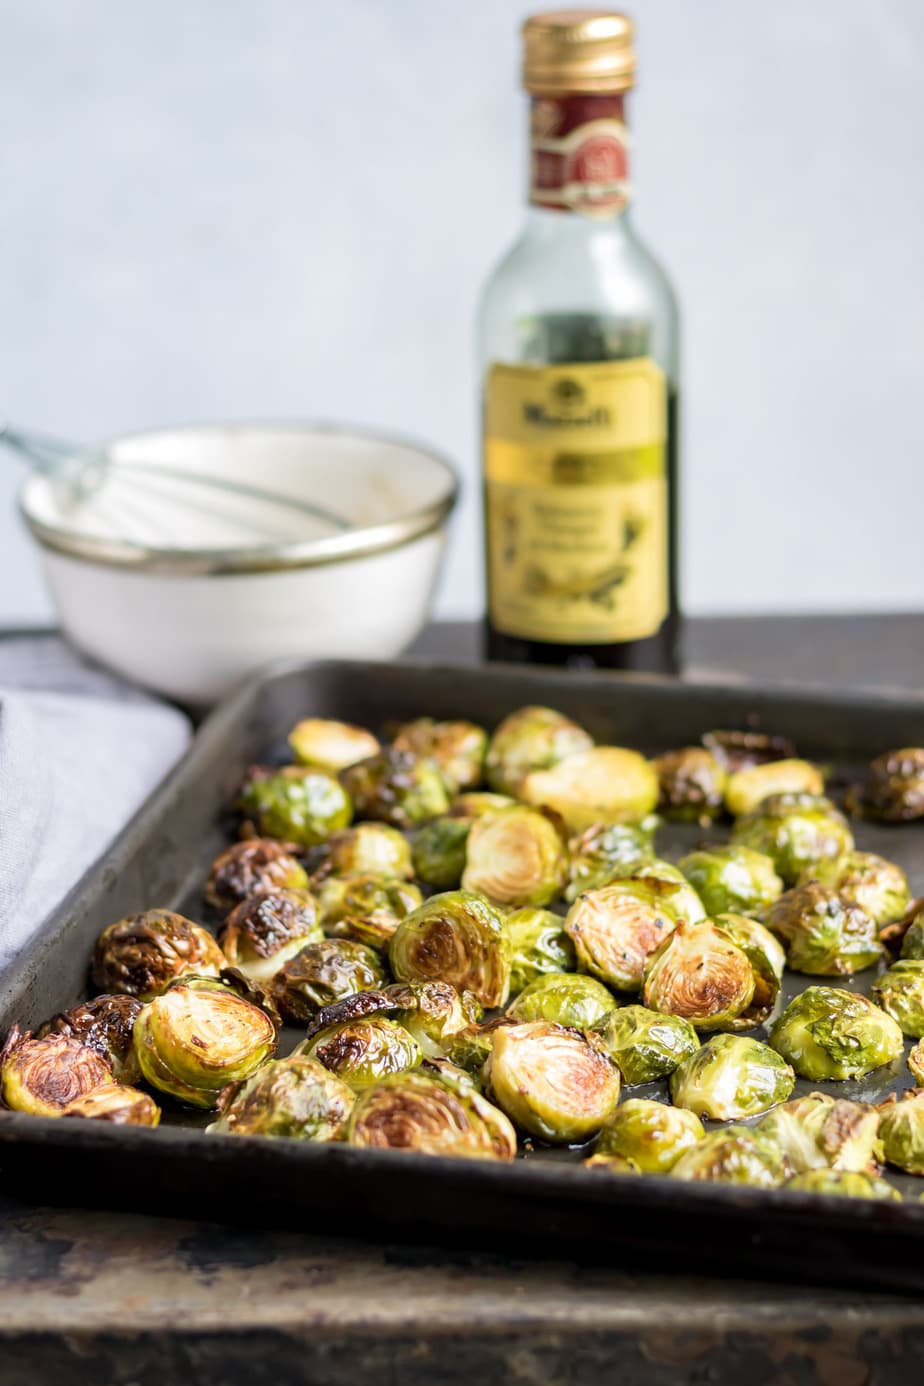 Tray of roasted sprouts in front of bottle of balsamic vinegar.